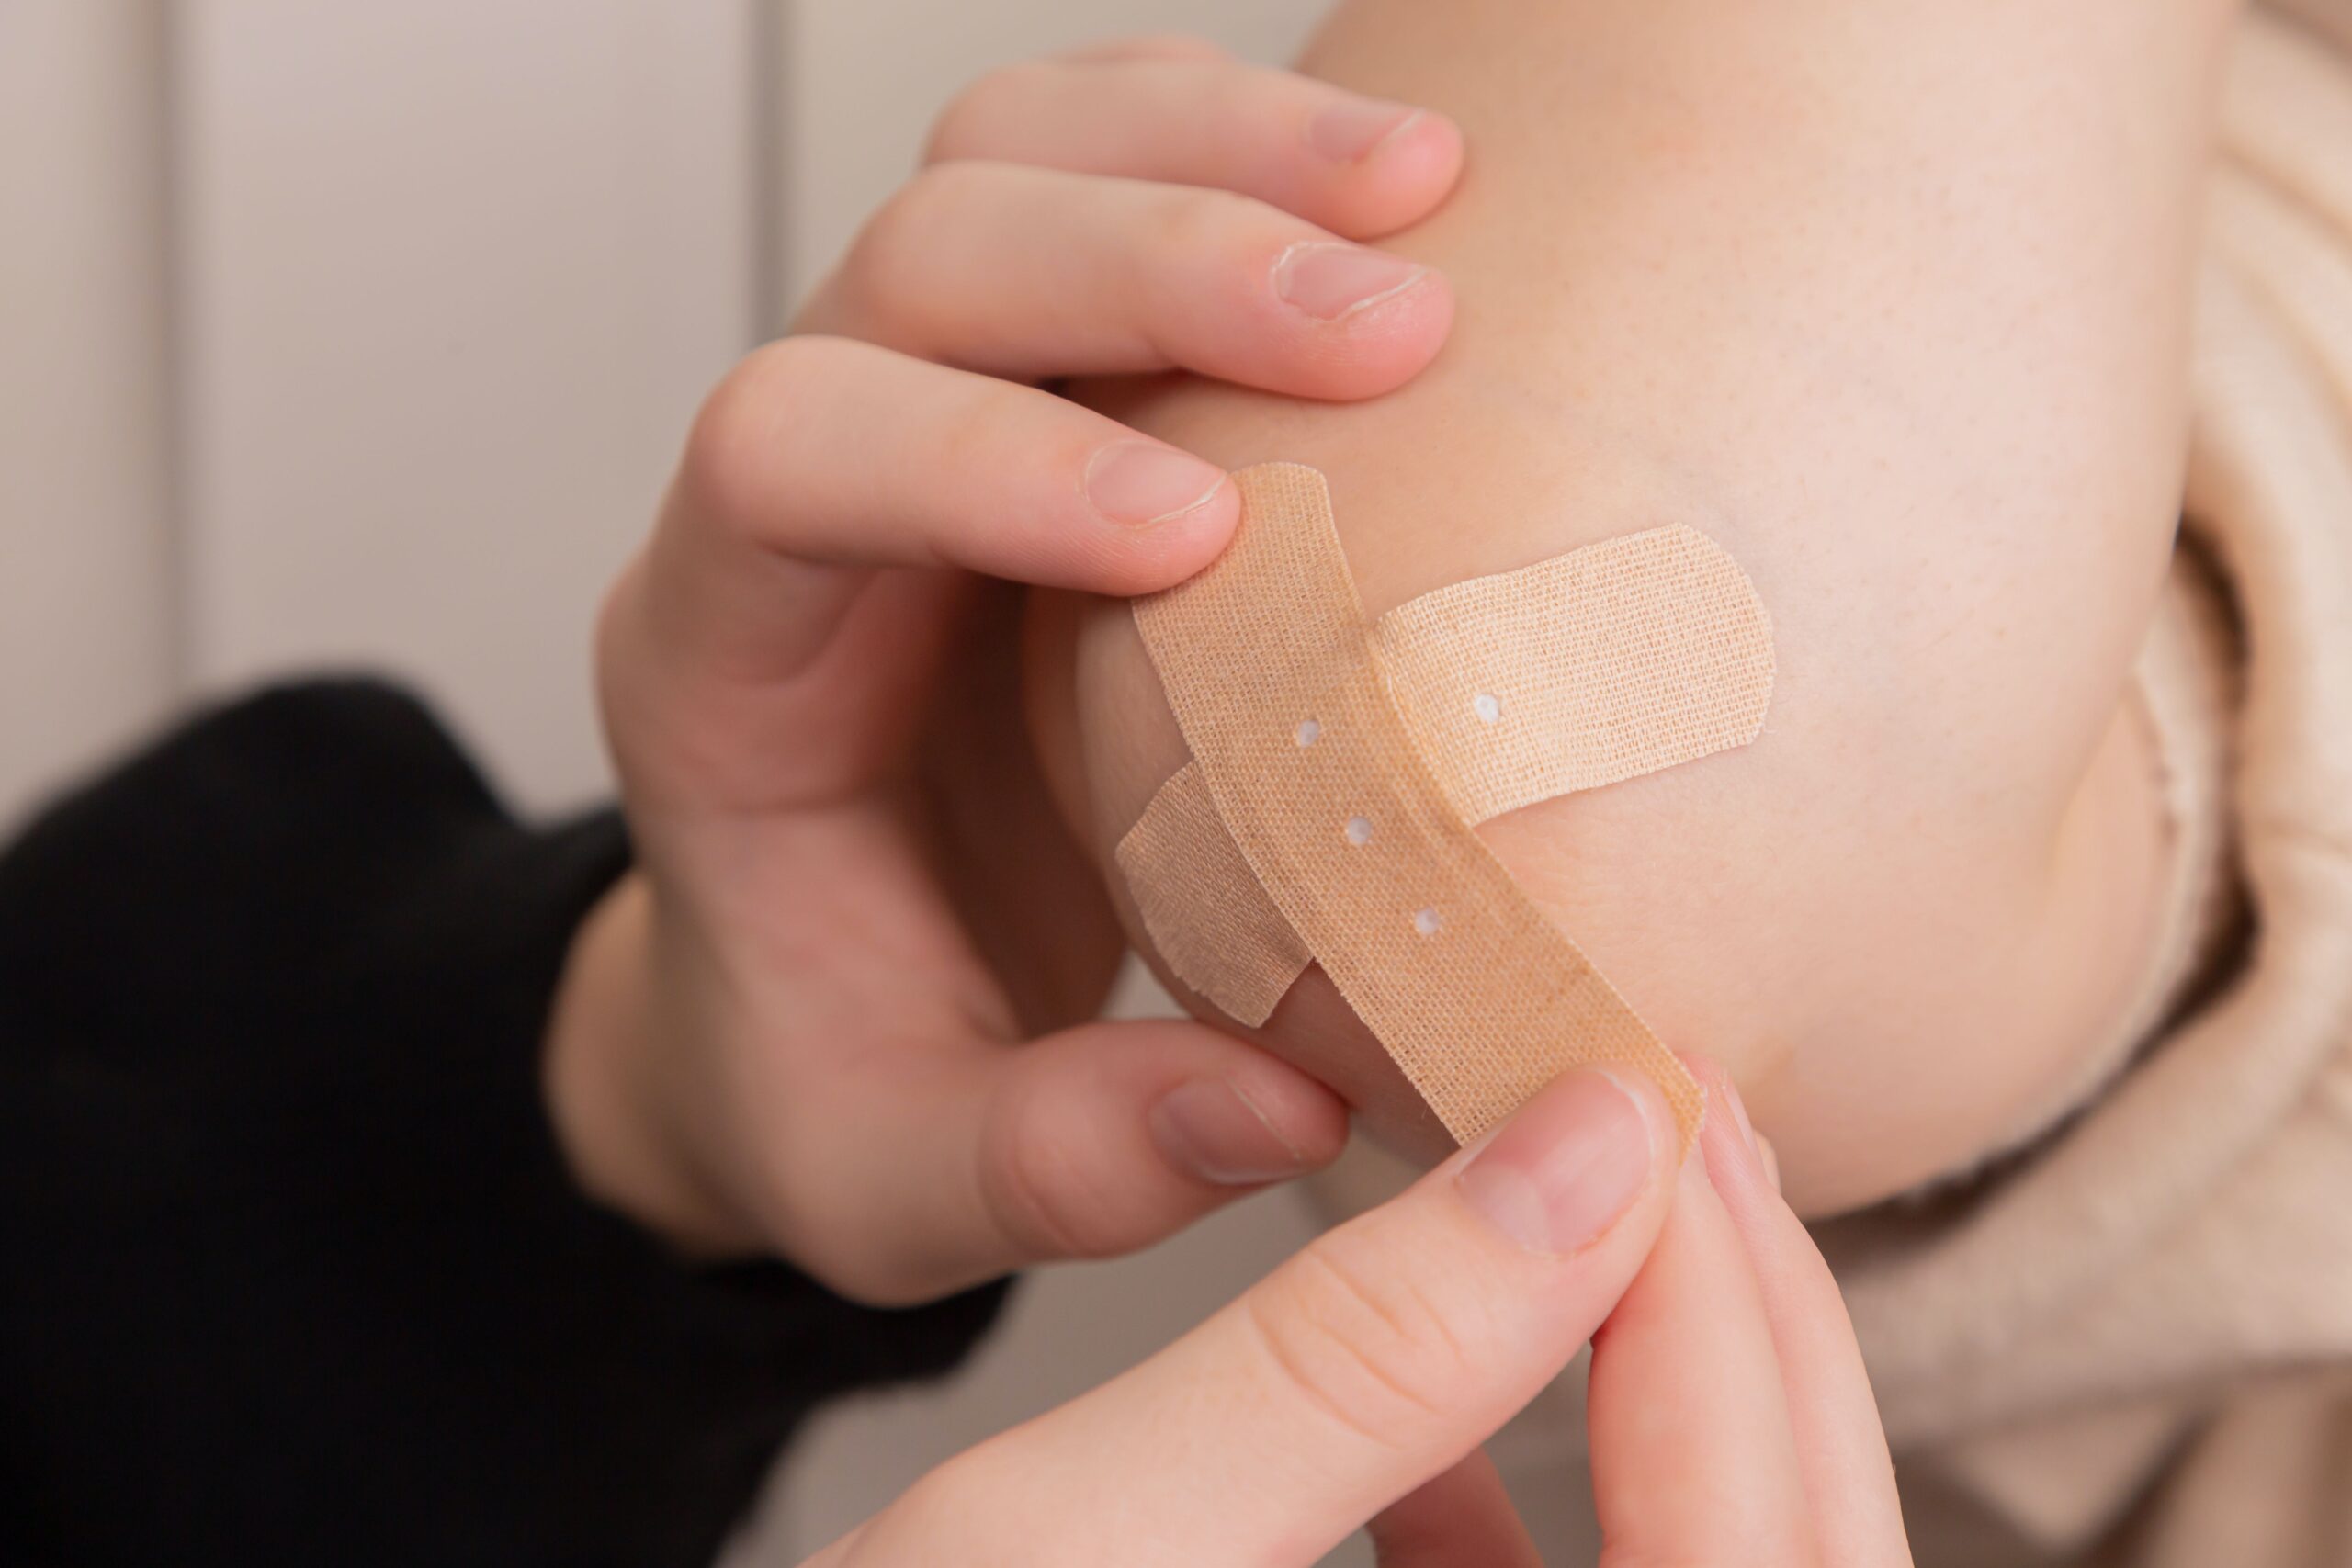 Image of bandage being placed over a scar to allow the wound to heal for a blog on scar and wound healing